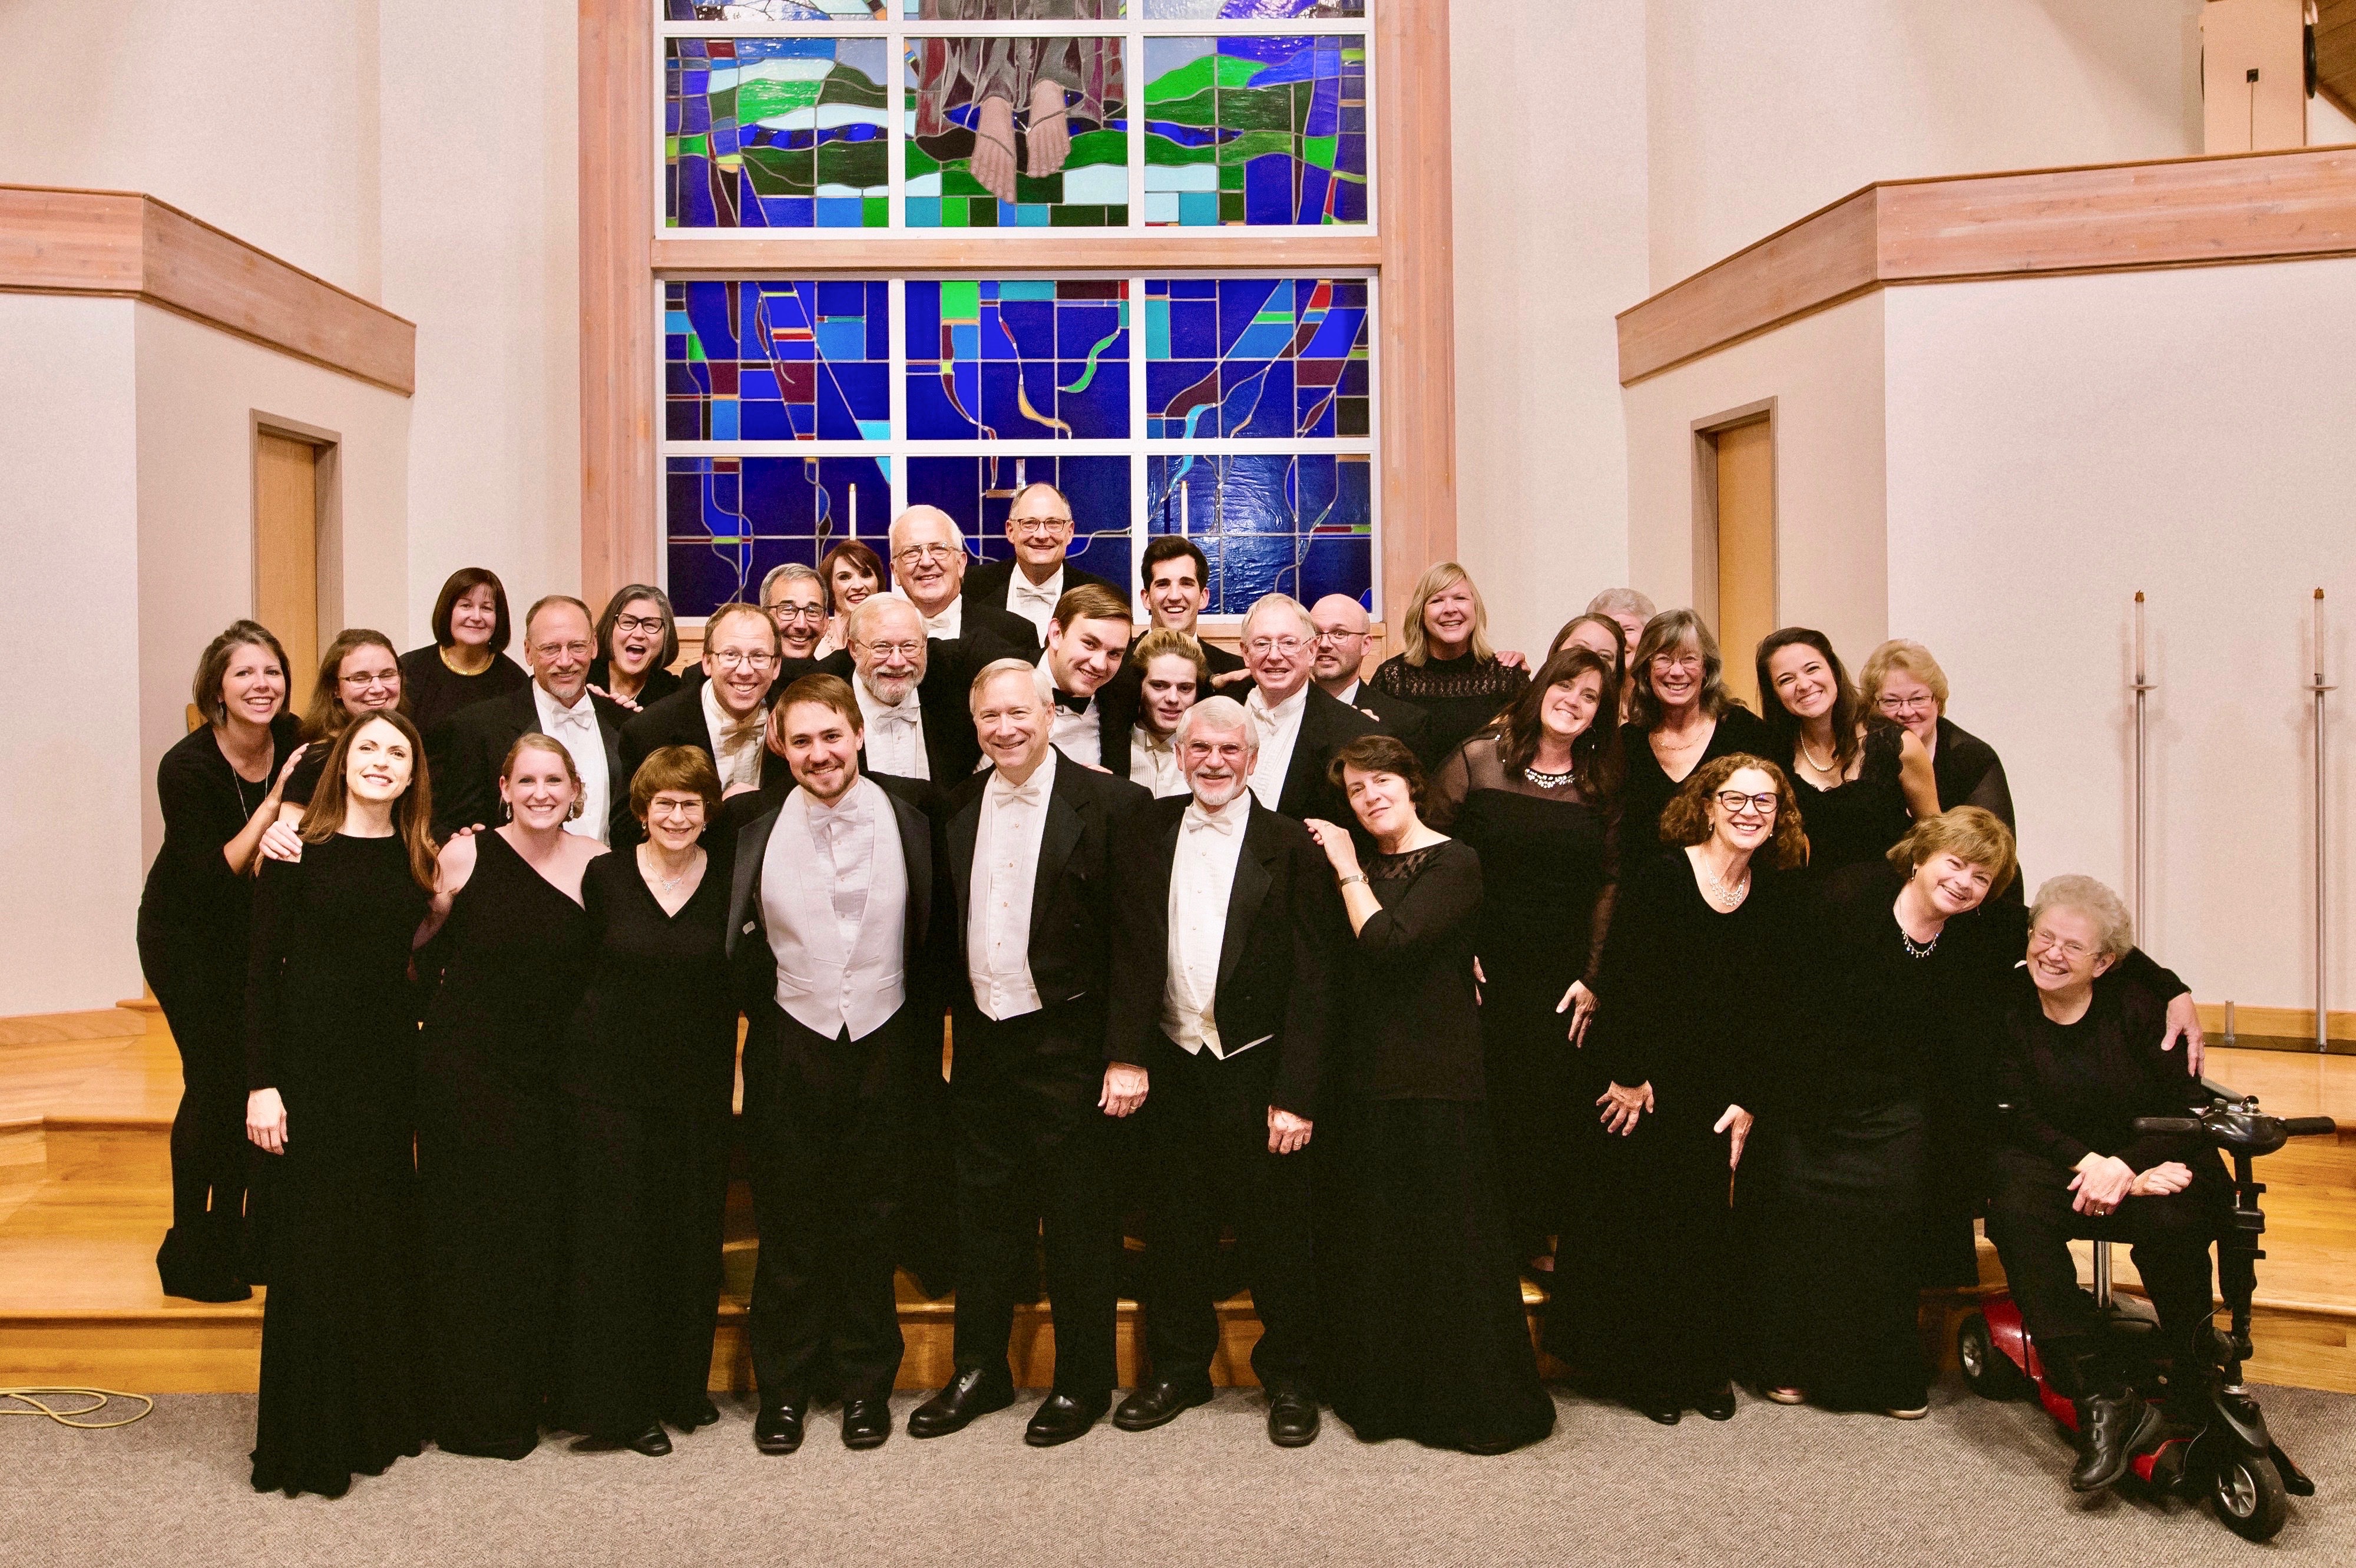 Hillsdale Arts Chorale will perform in Hillsdale College’s Christ Chapel Dec. 14